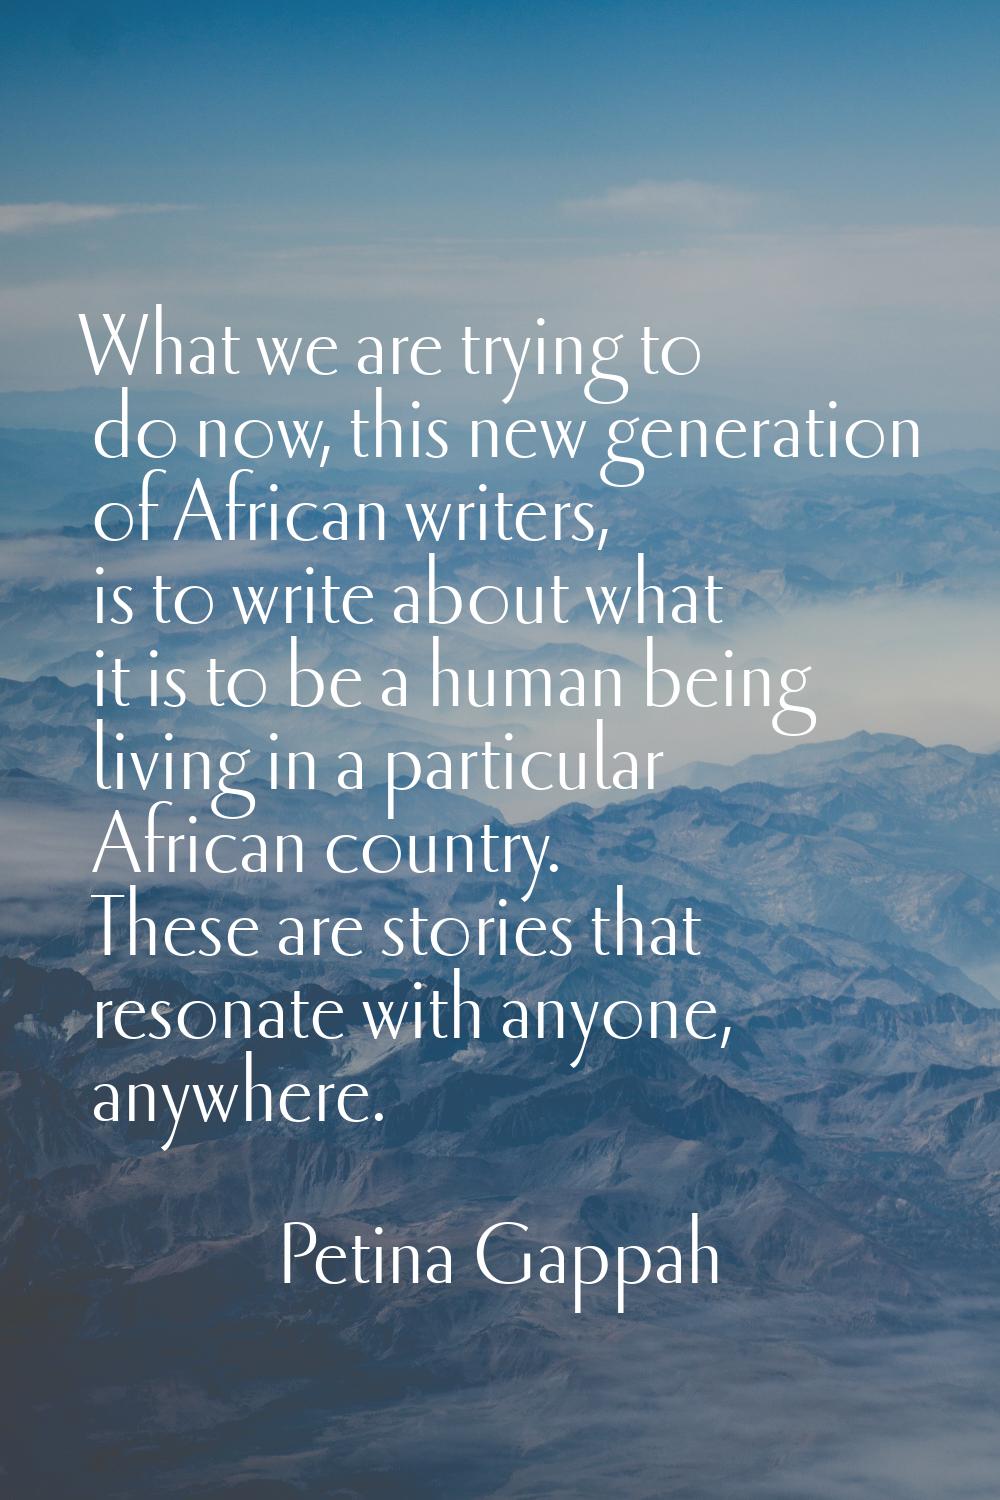 What we are trying to do now, this new generation of African writers, is to write about what it is 